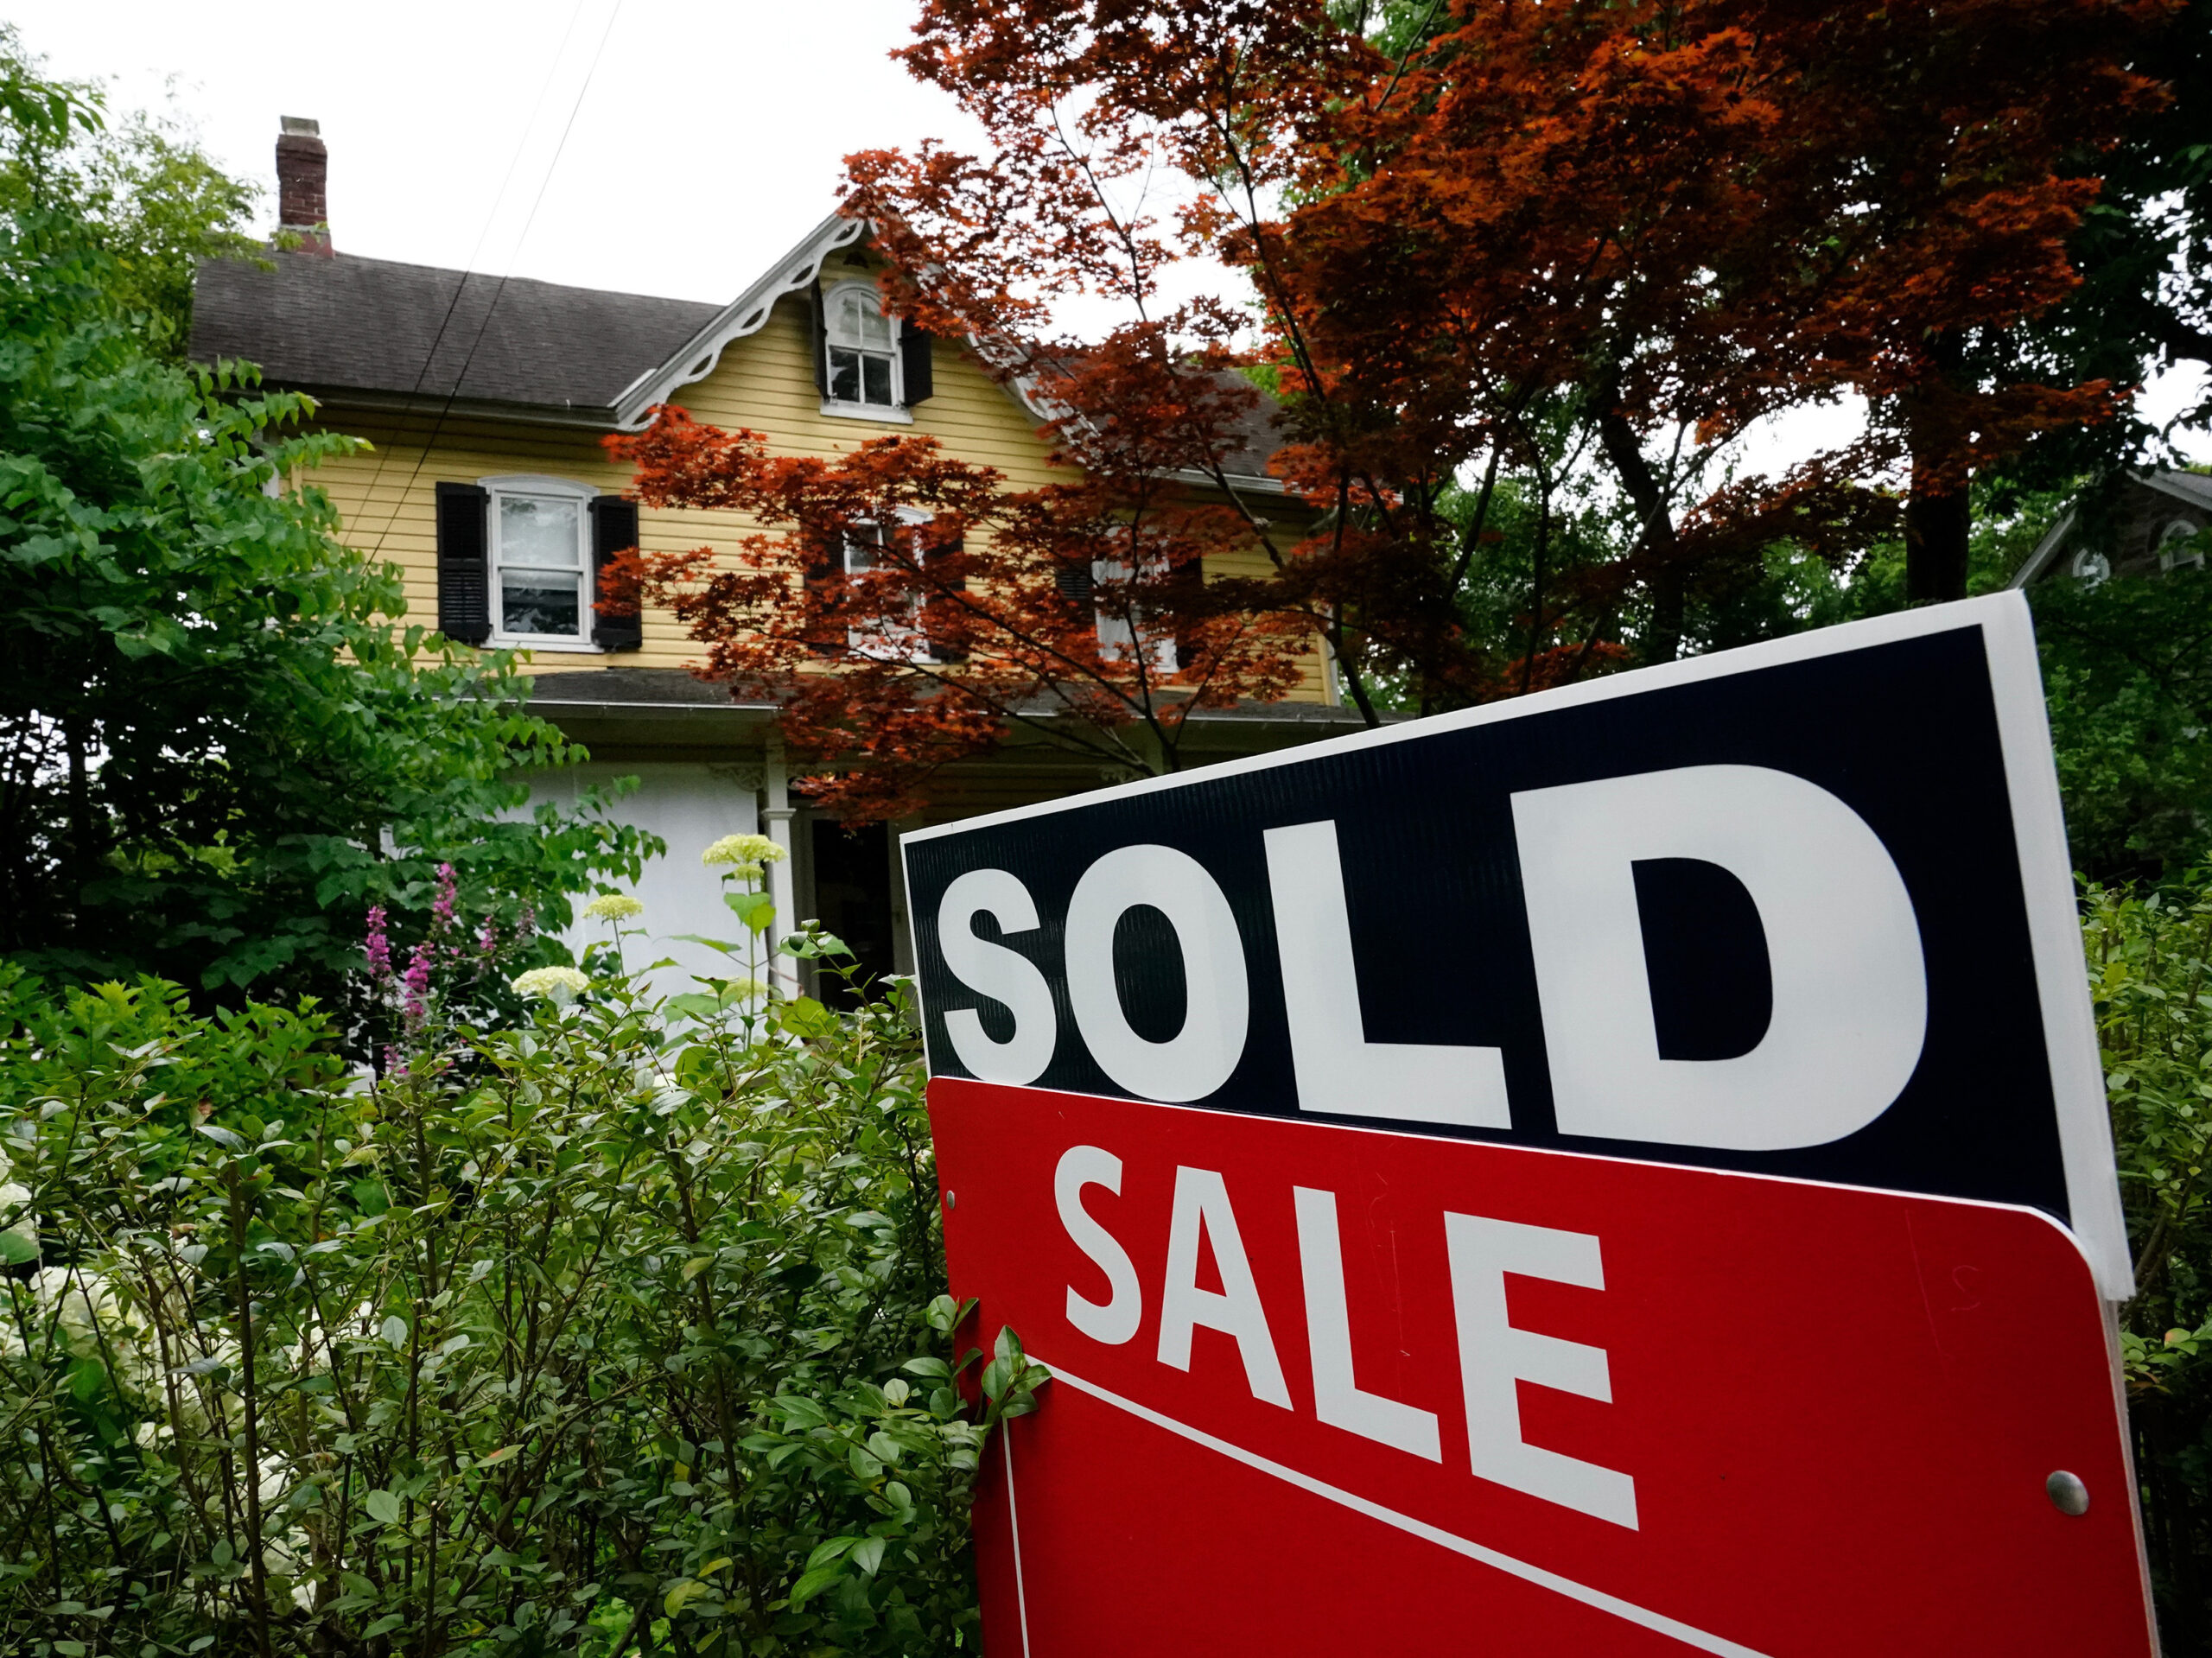 You’ll need more than $100,000 in income to afford a typical home, studies show